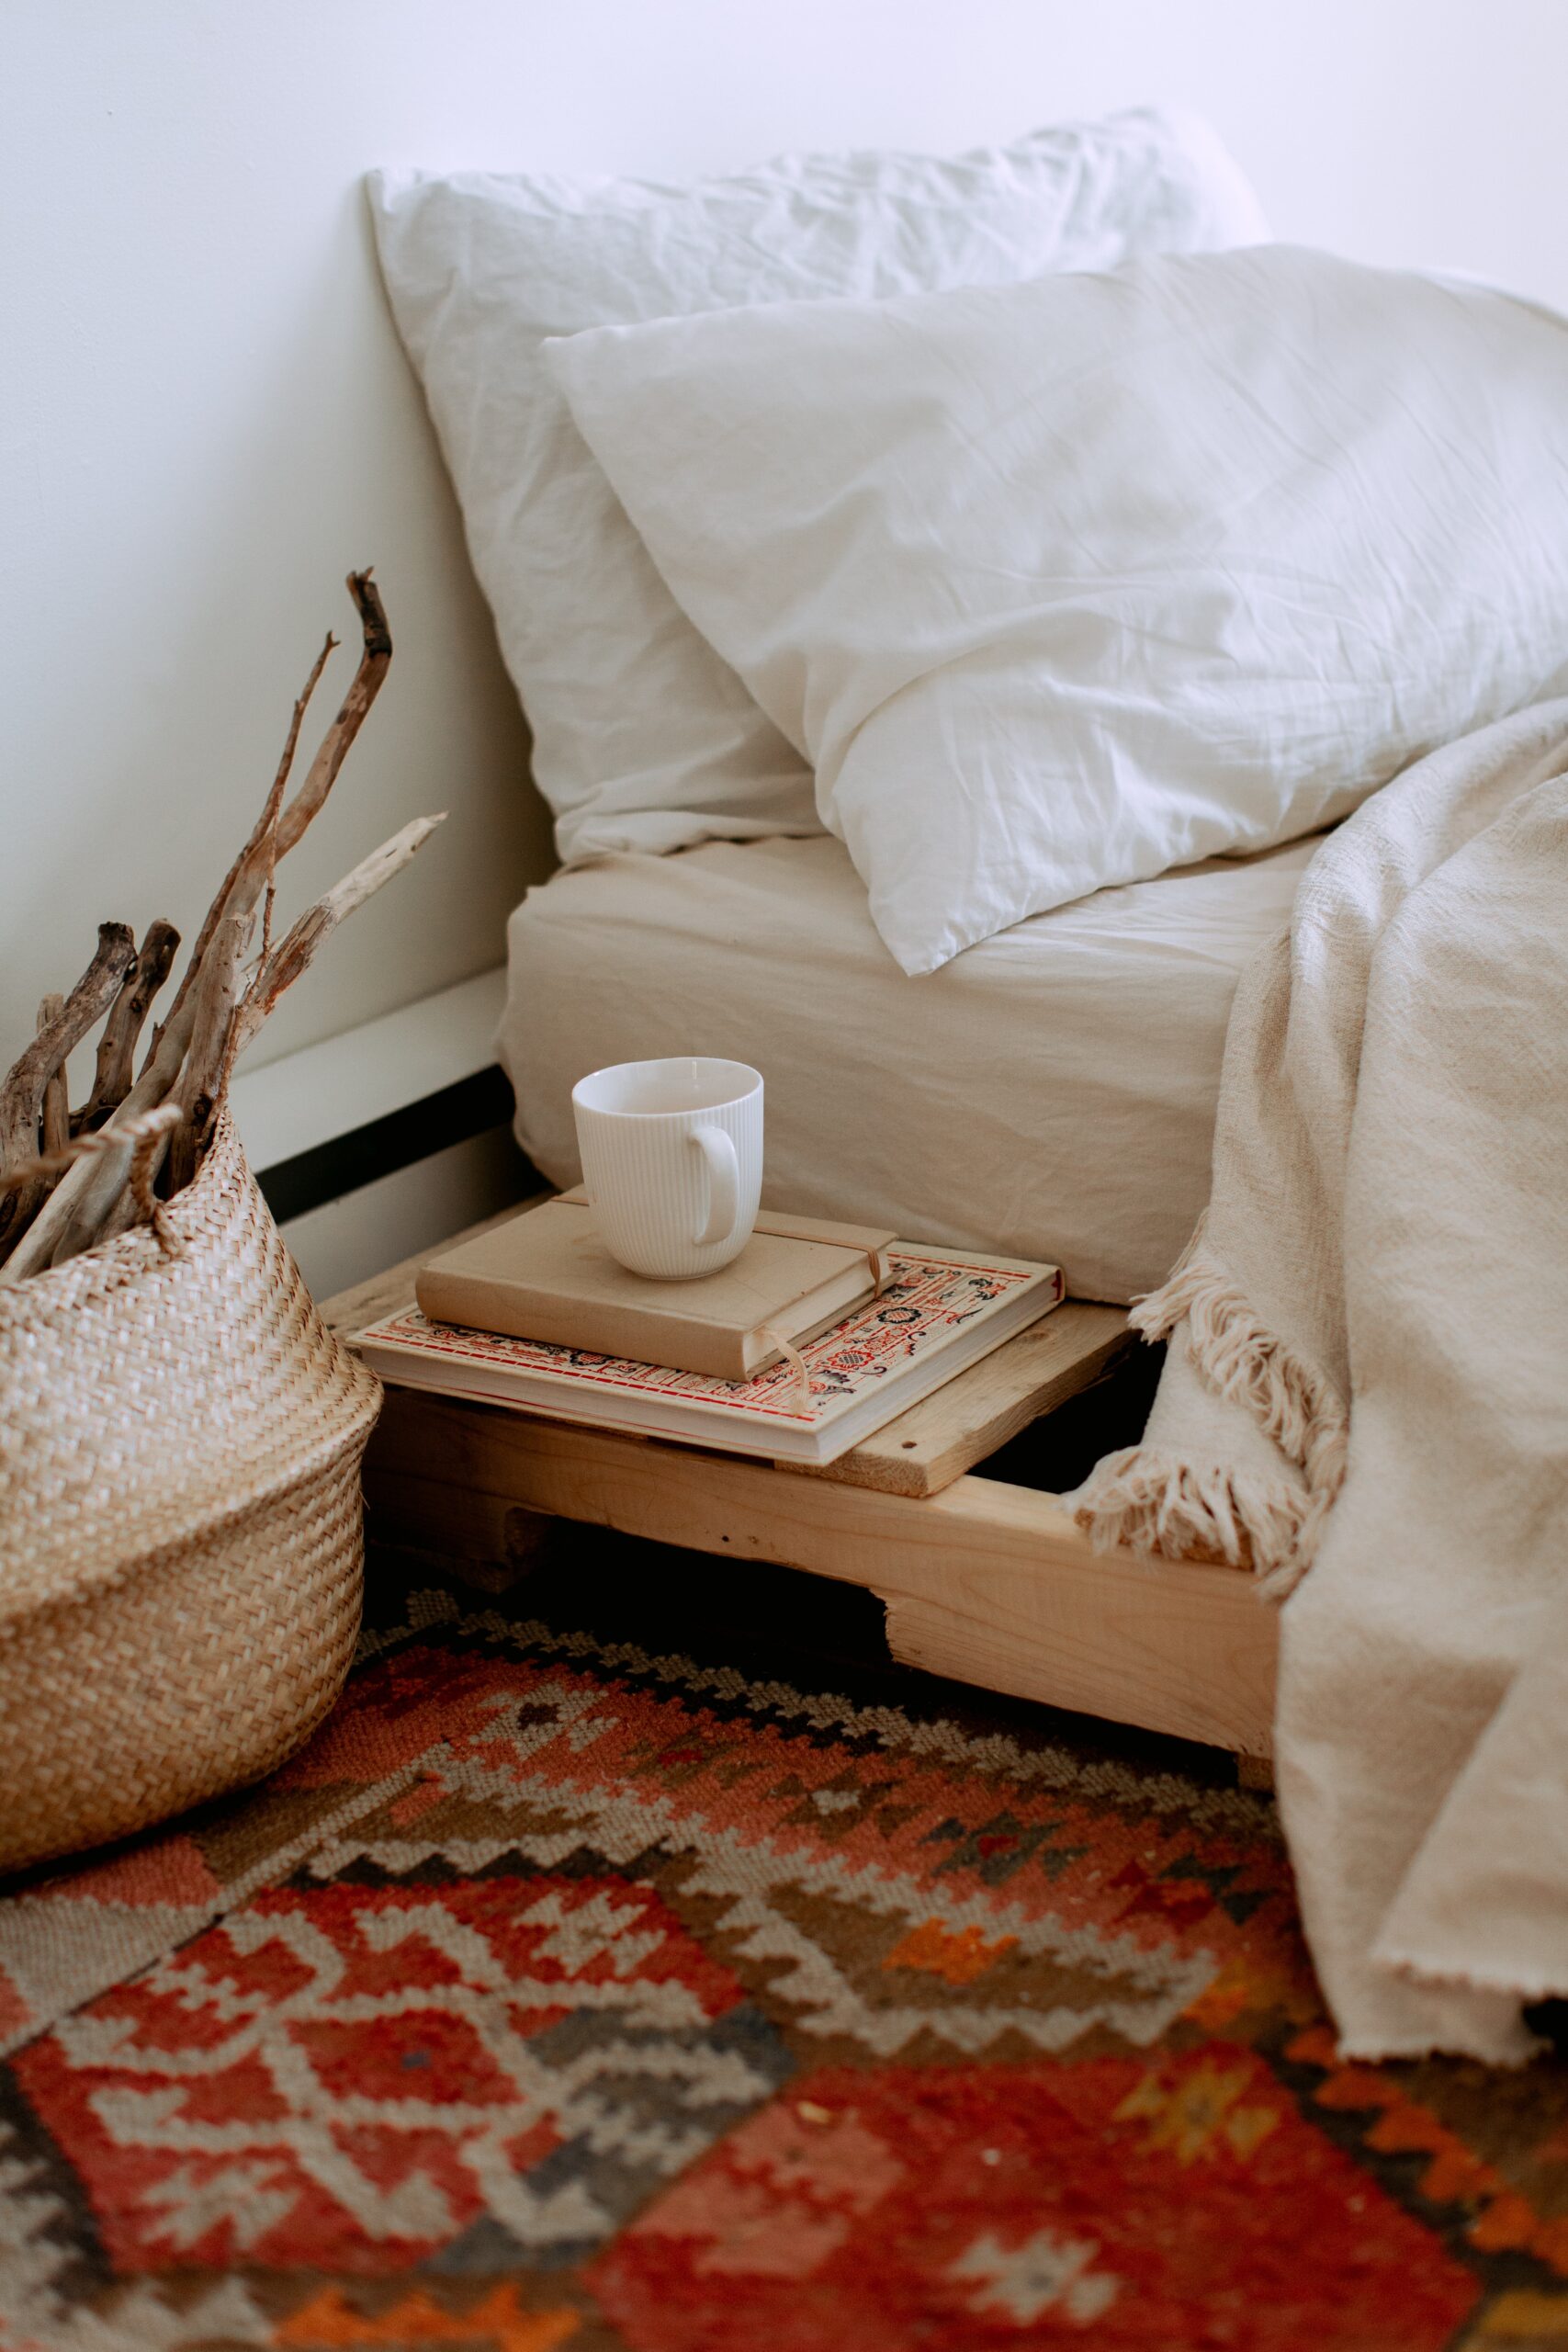 4 Simple Storage Ideas for Small Spaces on a Budget – Simplified